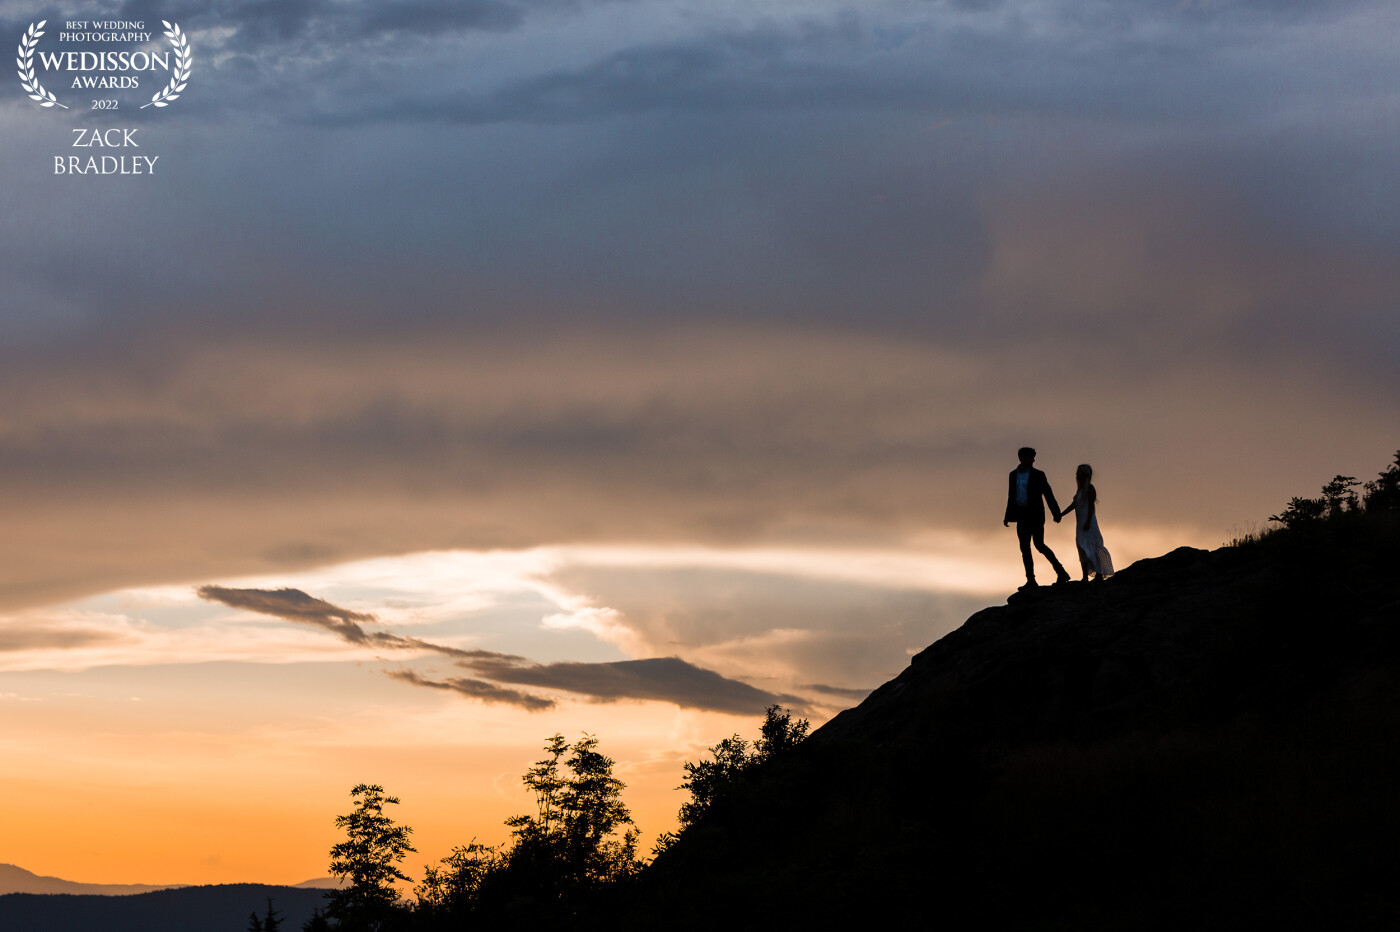 The mountains are a magical place and this day was no exception, the sunset was absolutely perfect for creating a silhouette of the couple.